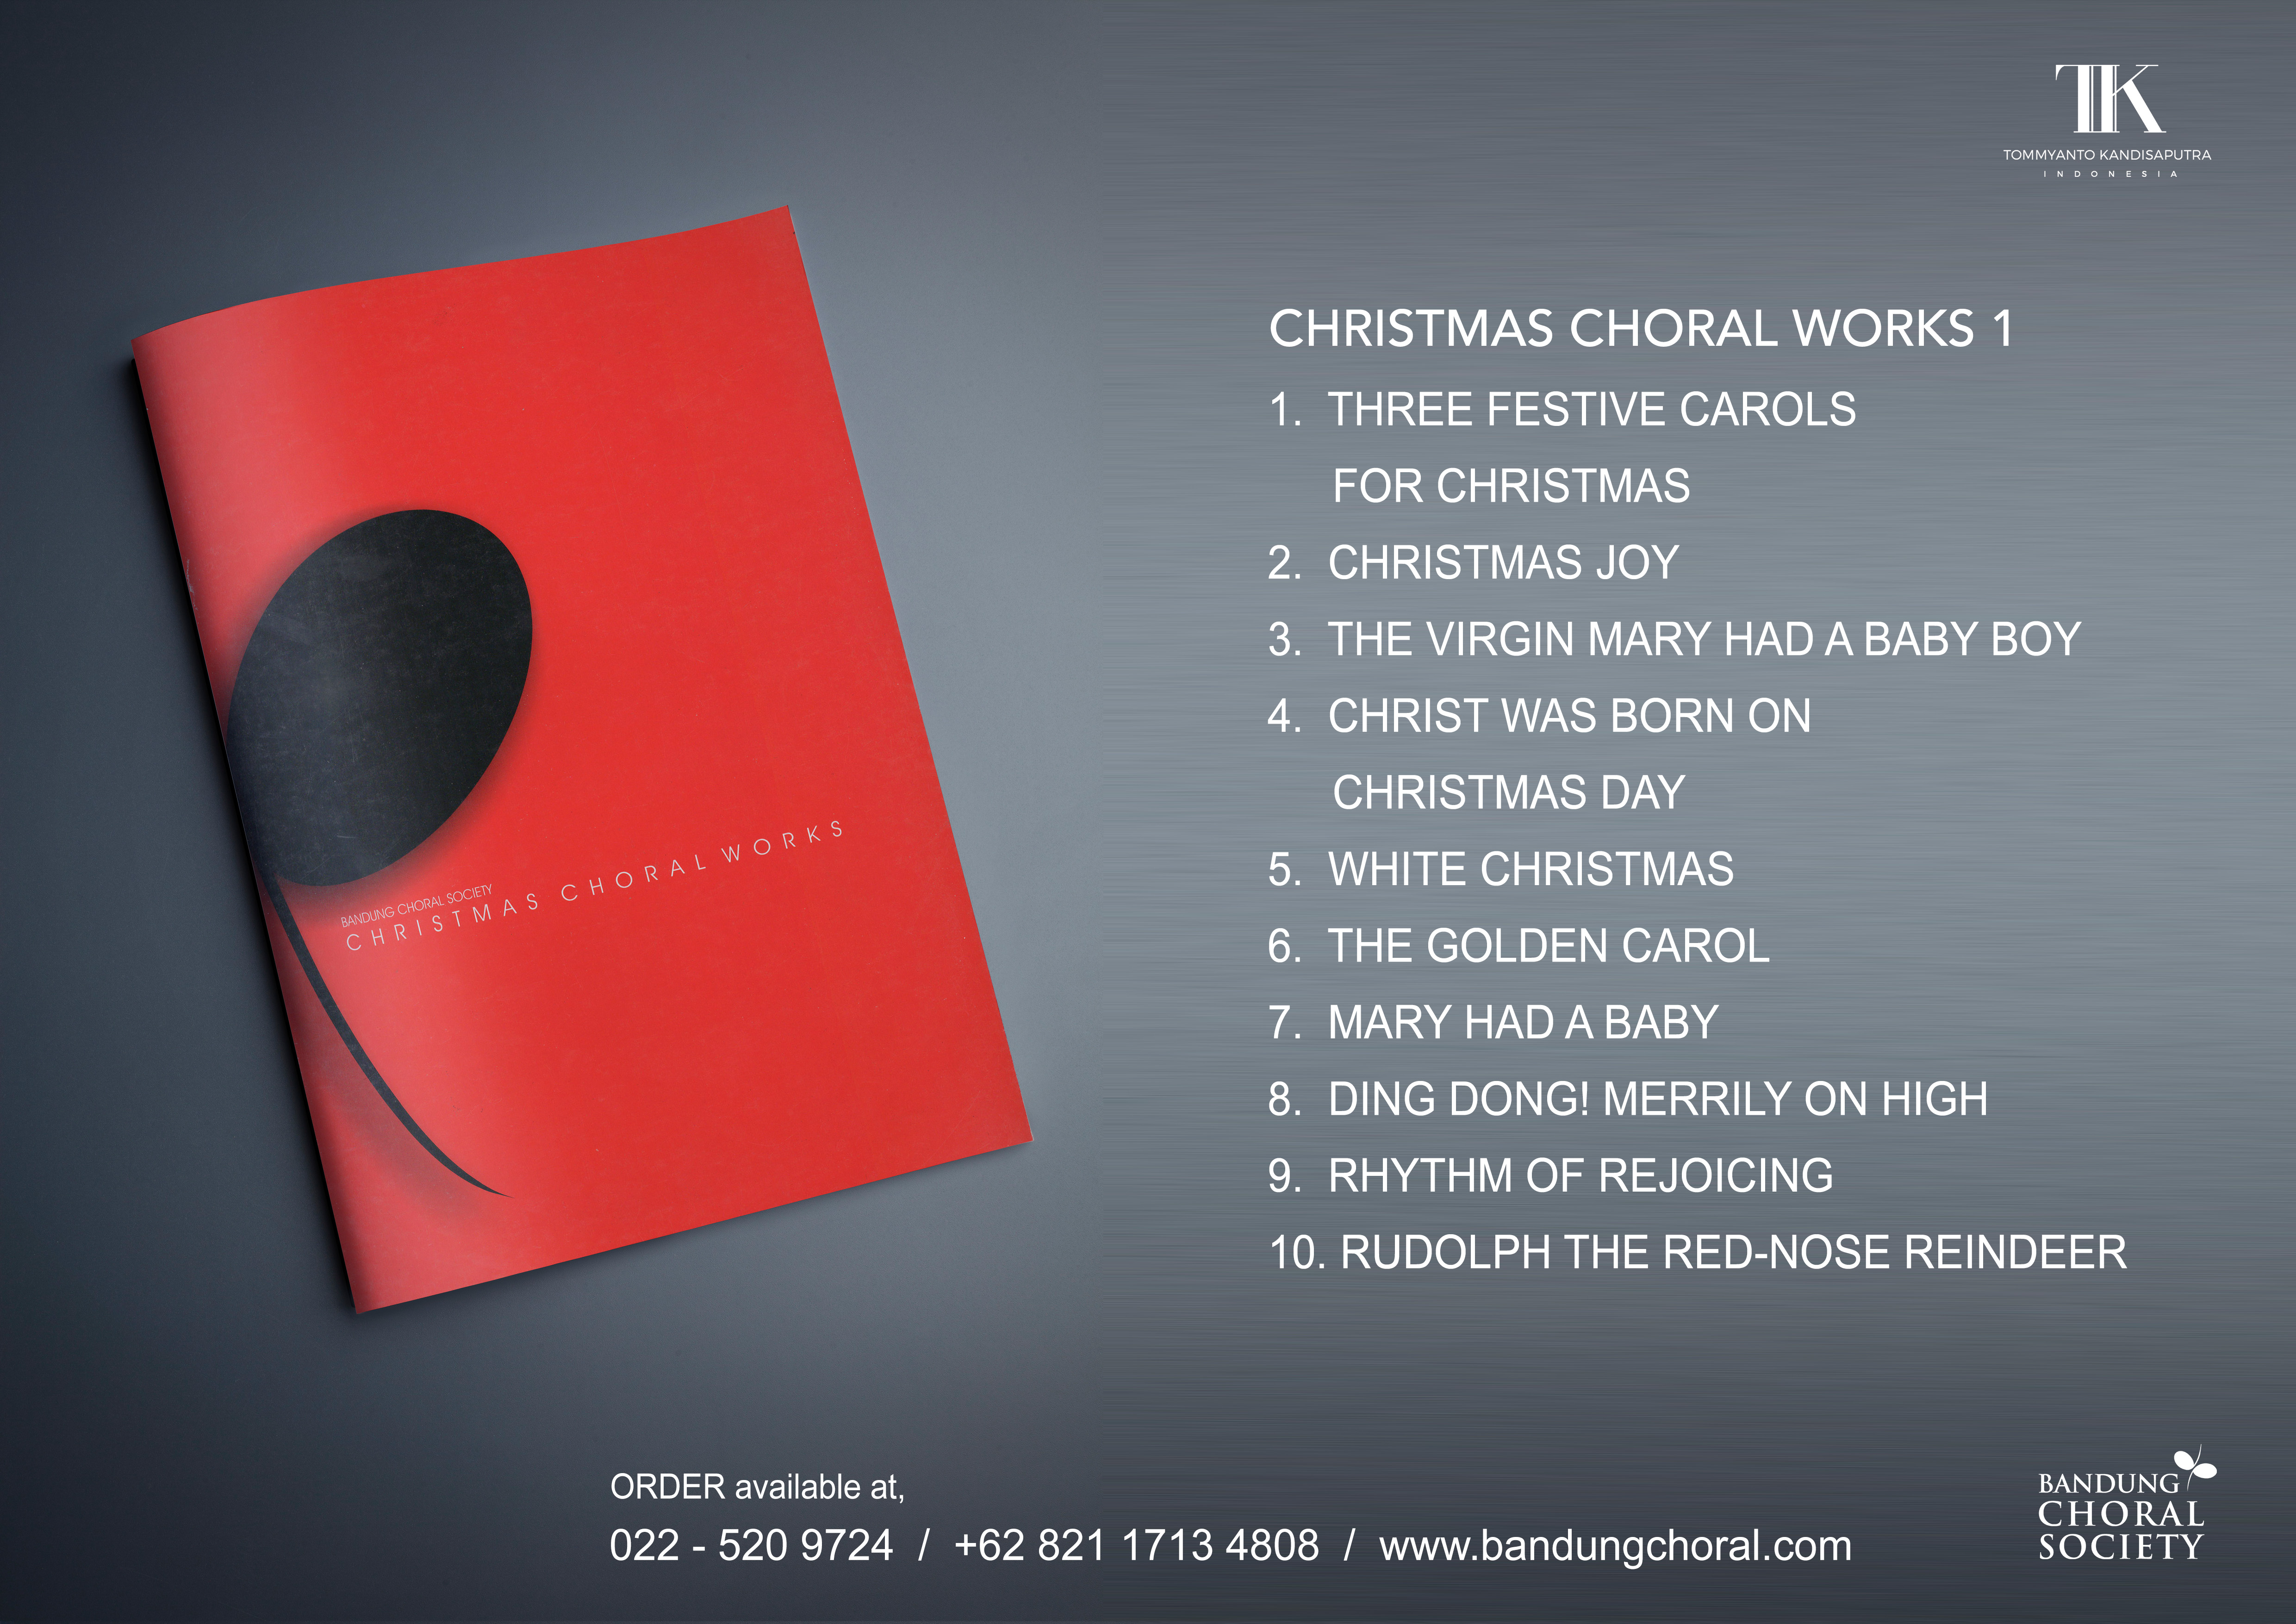 CHRISTMAS CHORAL WORKS 1